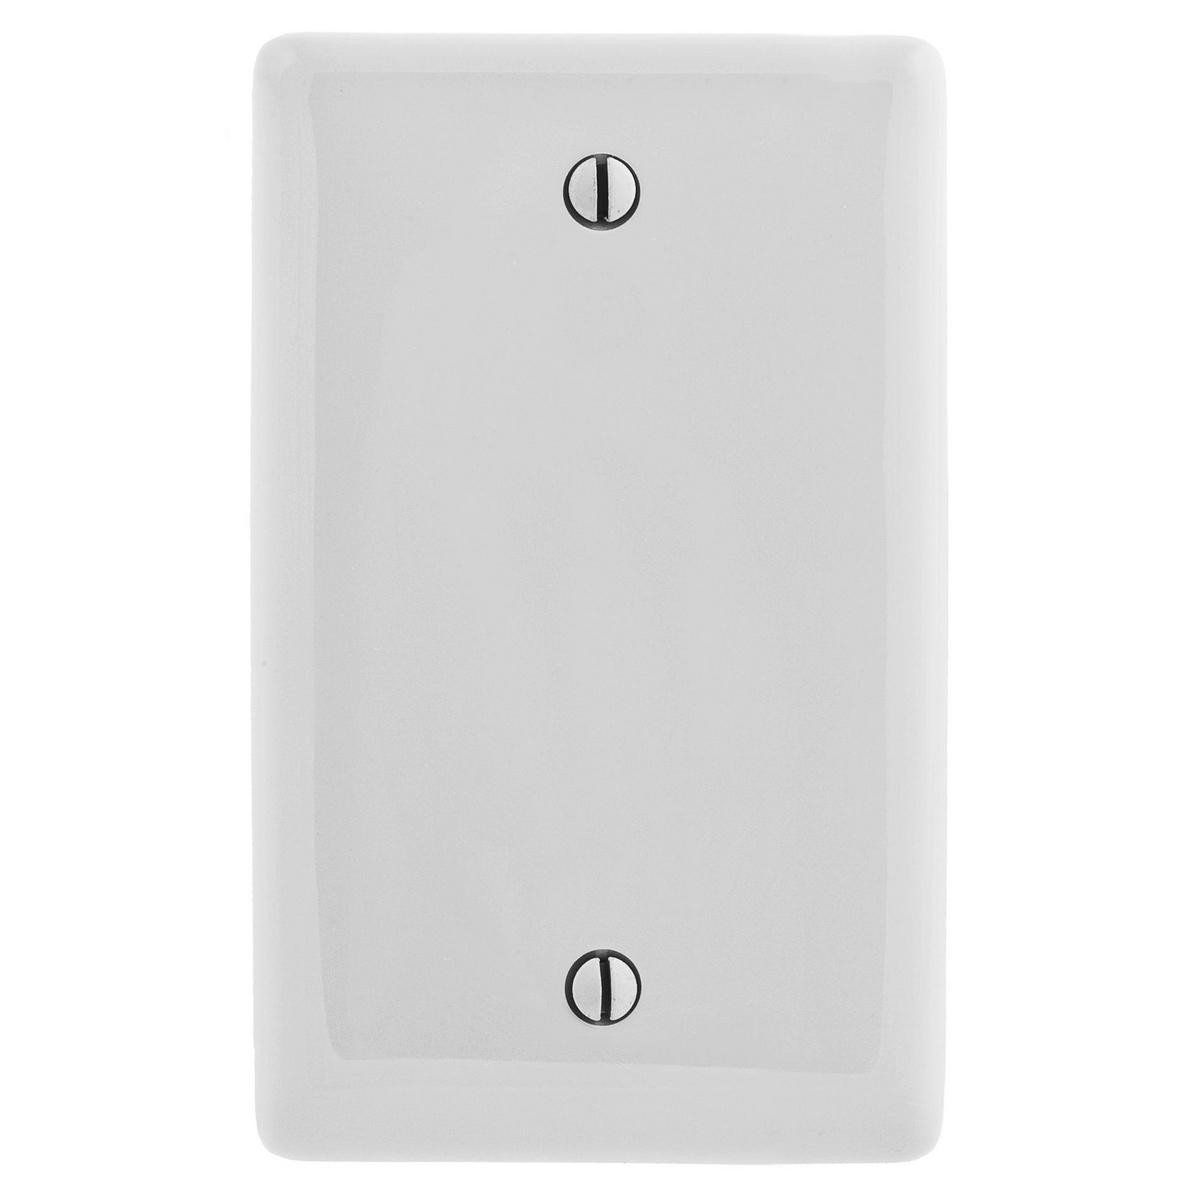 Hubbell NP13OW Wallplates and Box Covers, Wallplate, Nylon, 1-Gang, Blank, Box Mount,Office White  ; Reinforcement ribs for extra strength ; High-impact, self-extinguishing nylon material ; Captive screw feature holds mounting screw in place ; Standard Size is 1/8" larg